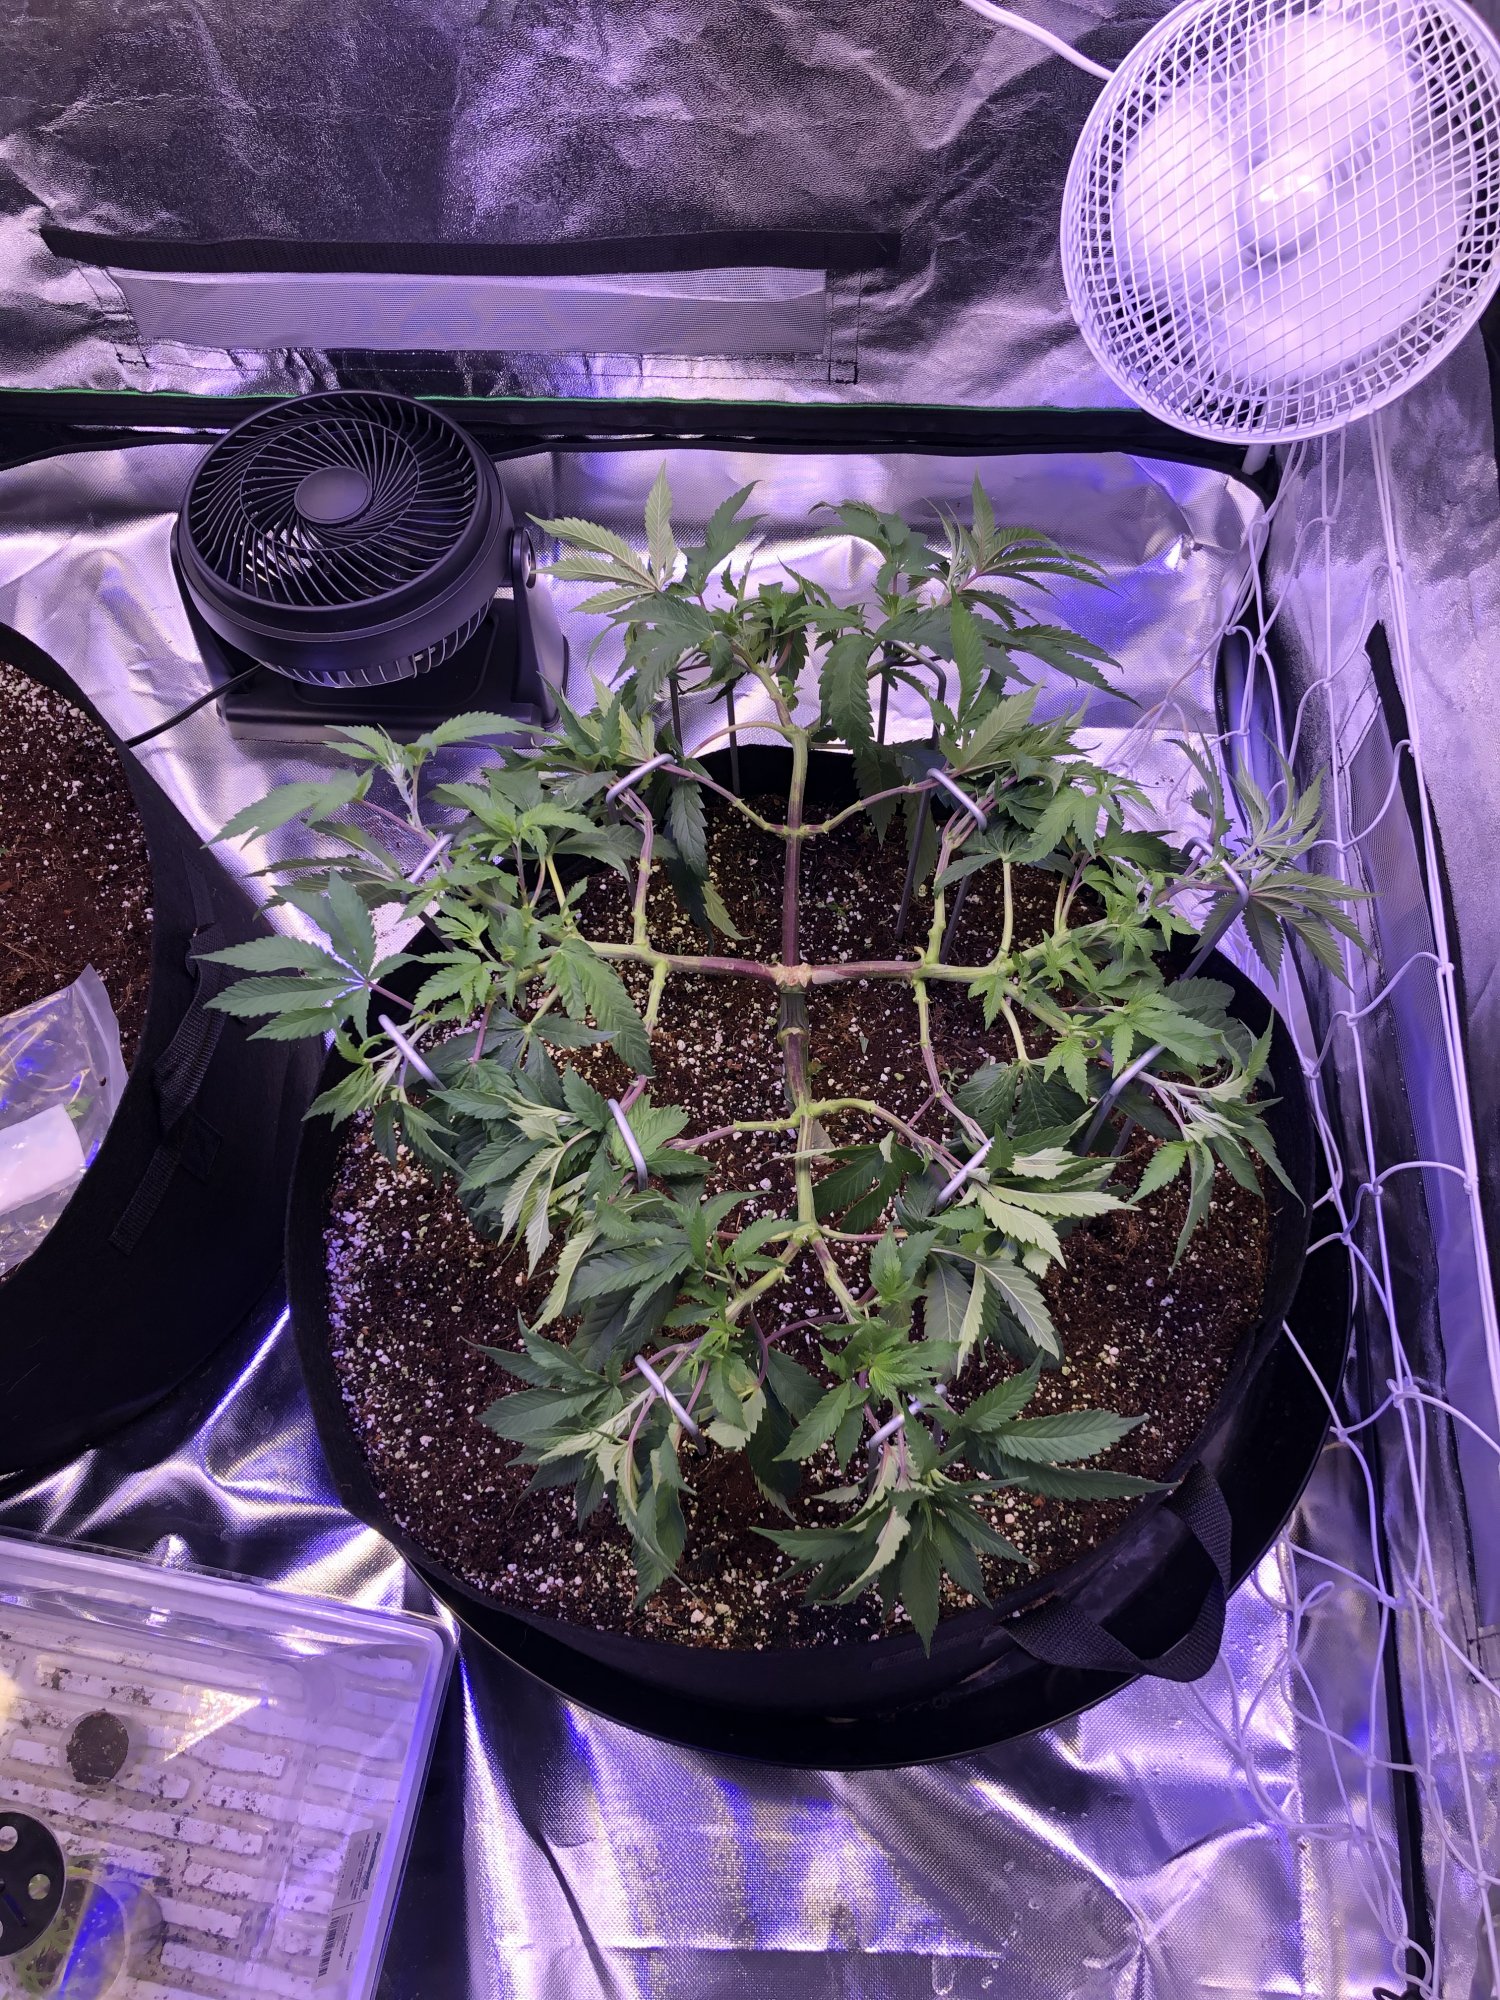 First indoor grow in coco hows it looking